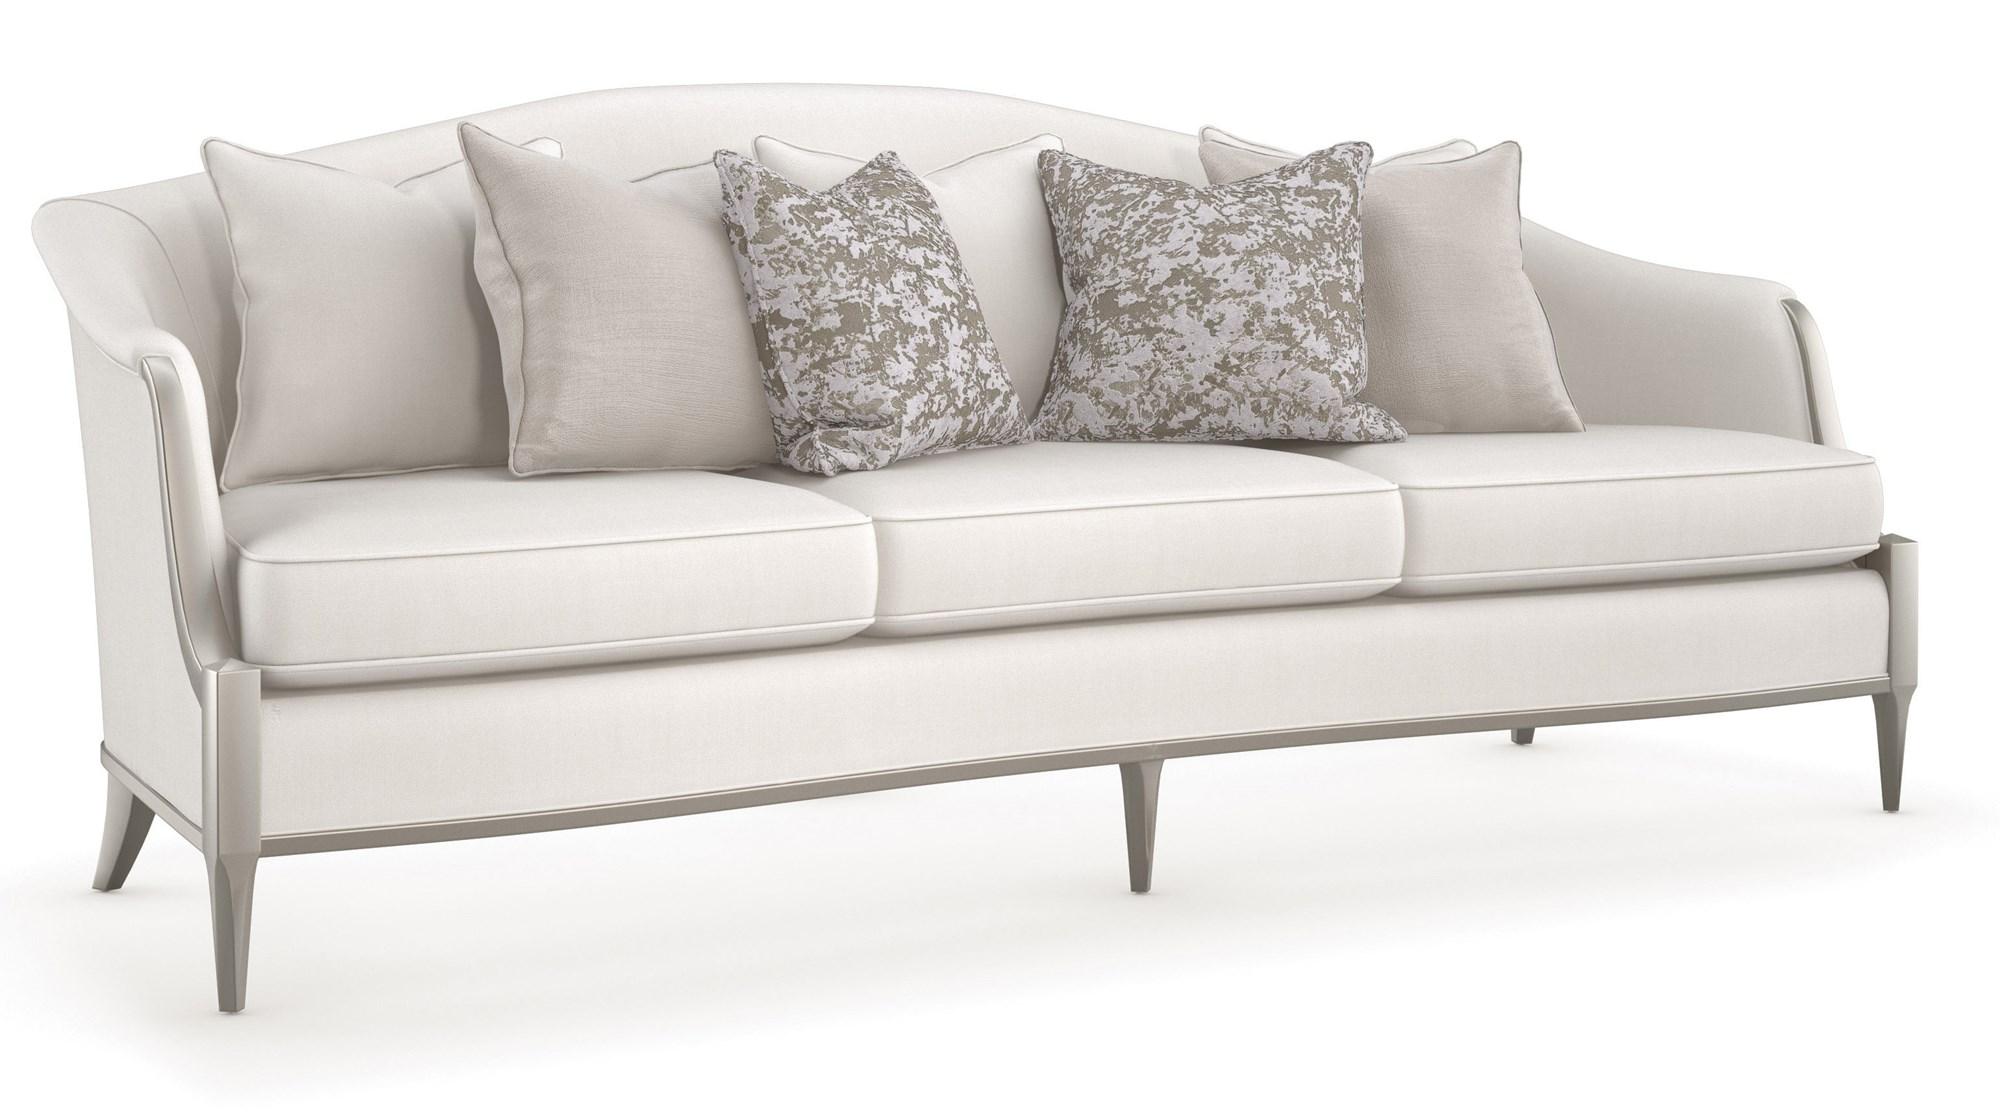 Traditional Sofa SWEET AND PETITE UPH-421-012-A in Light Gray Fabric